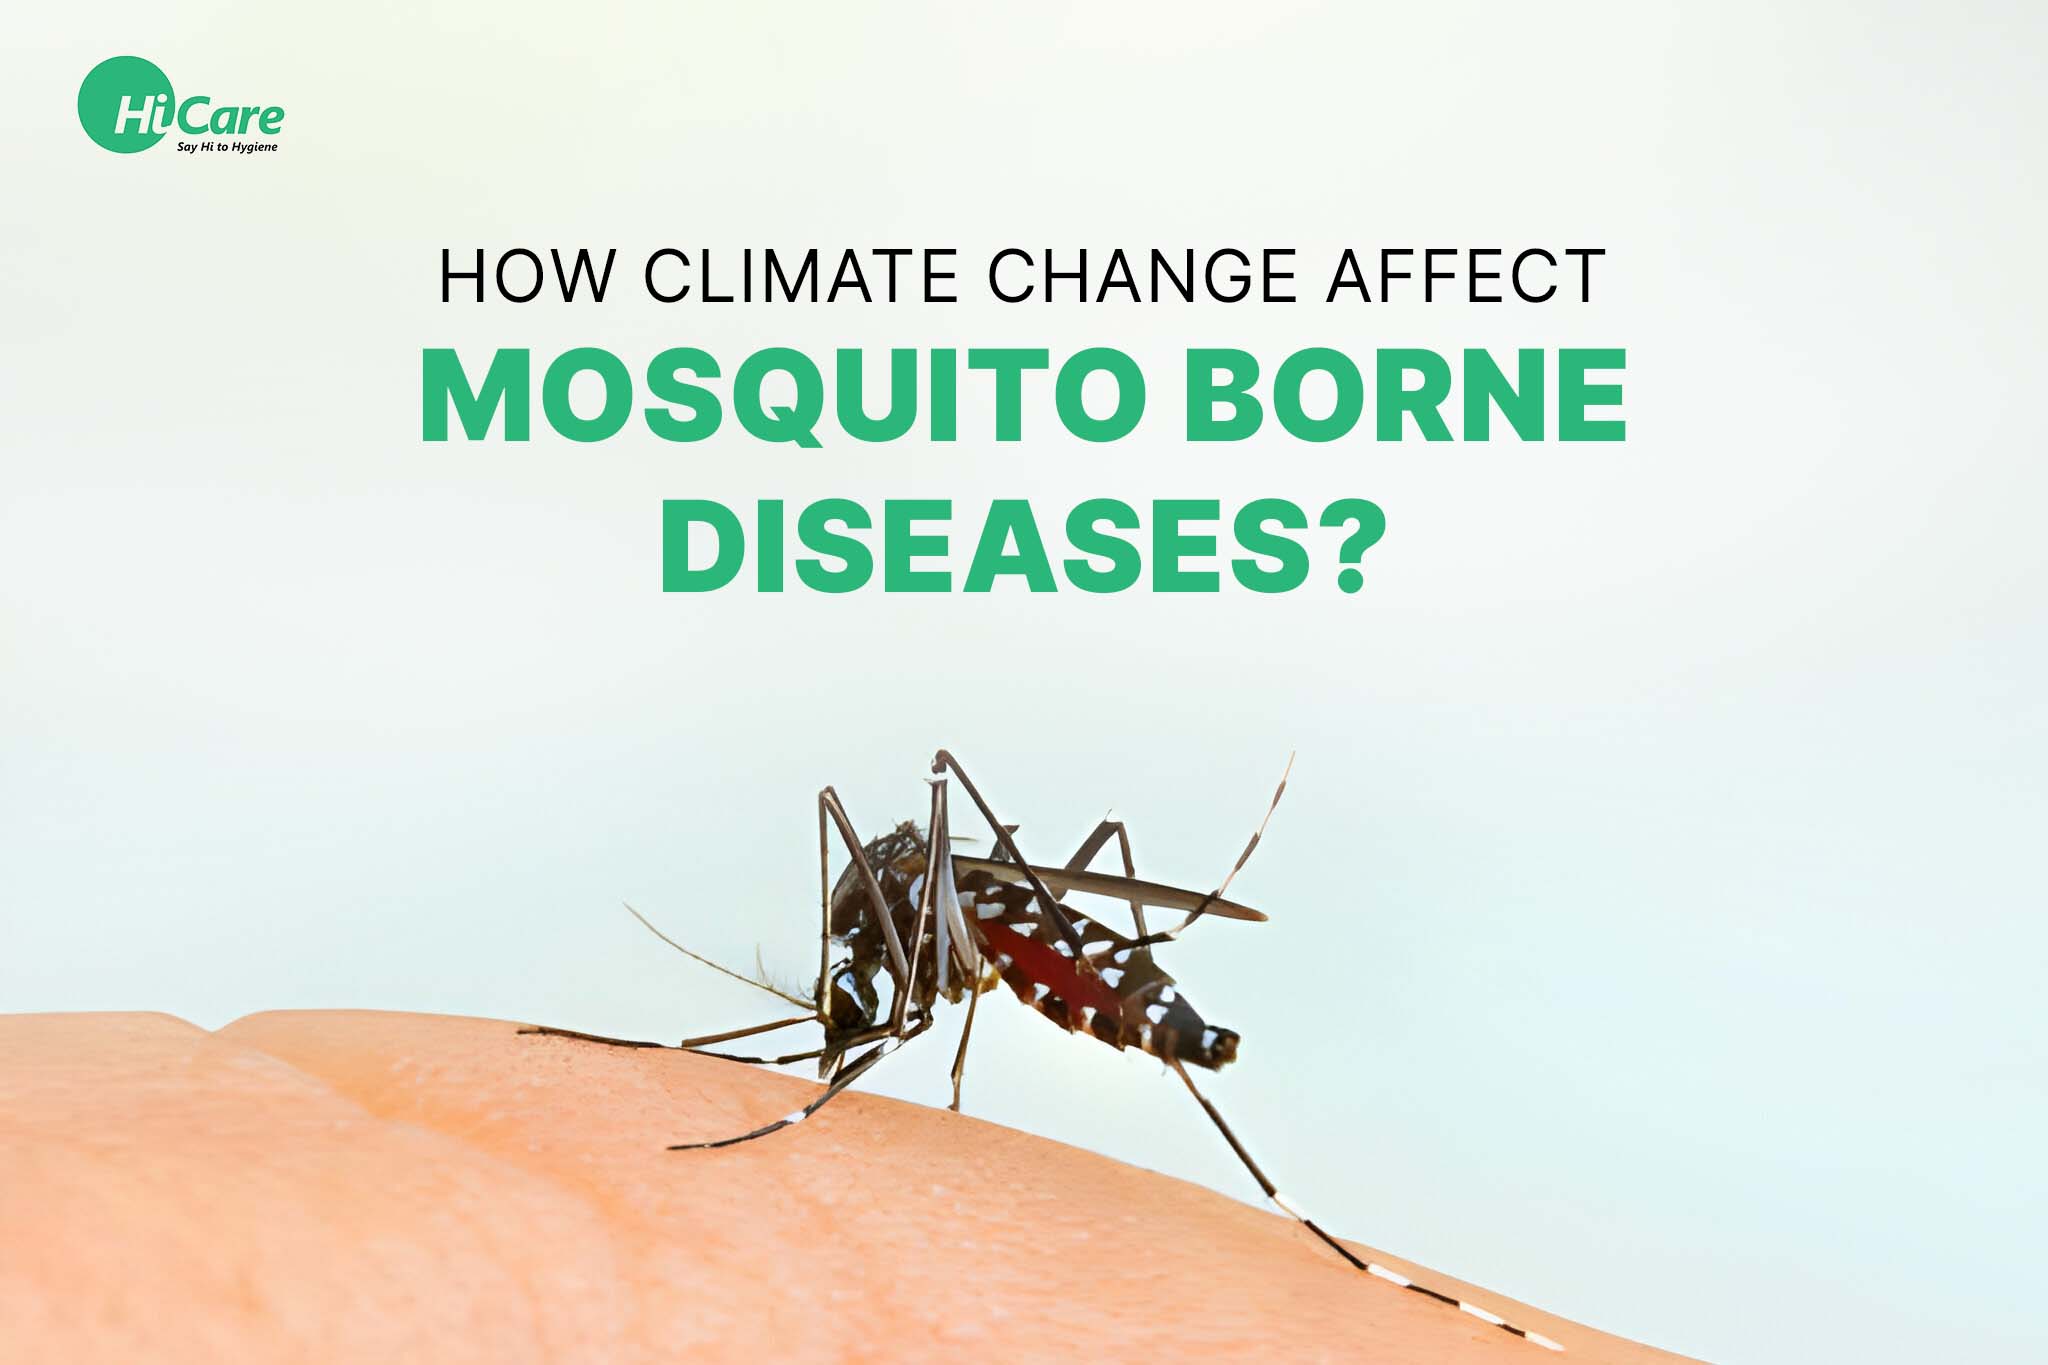 effect of climate change on mosquito-borne diseases